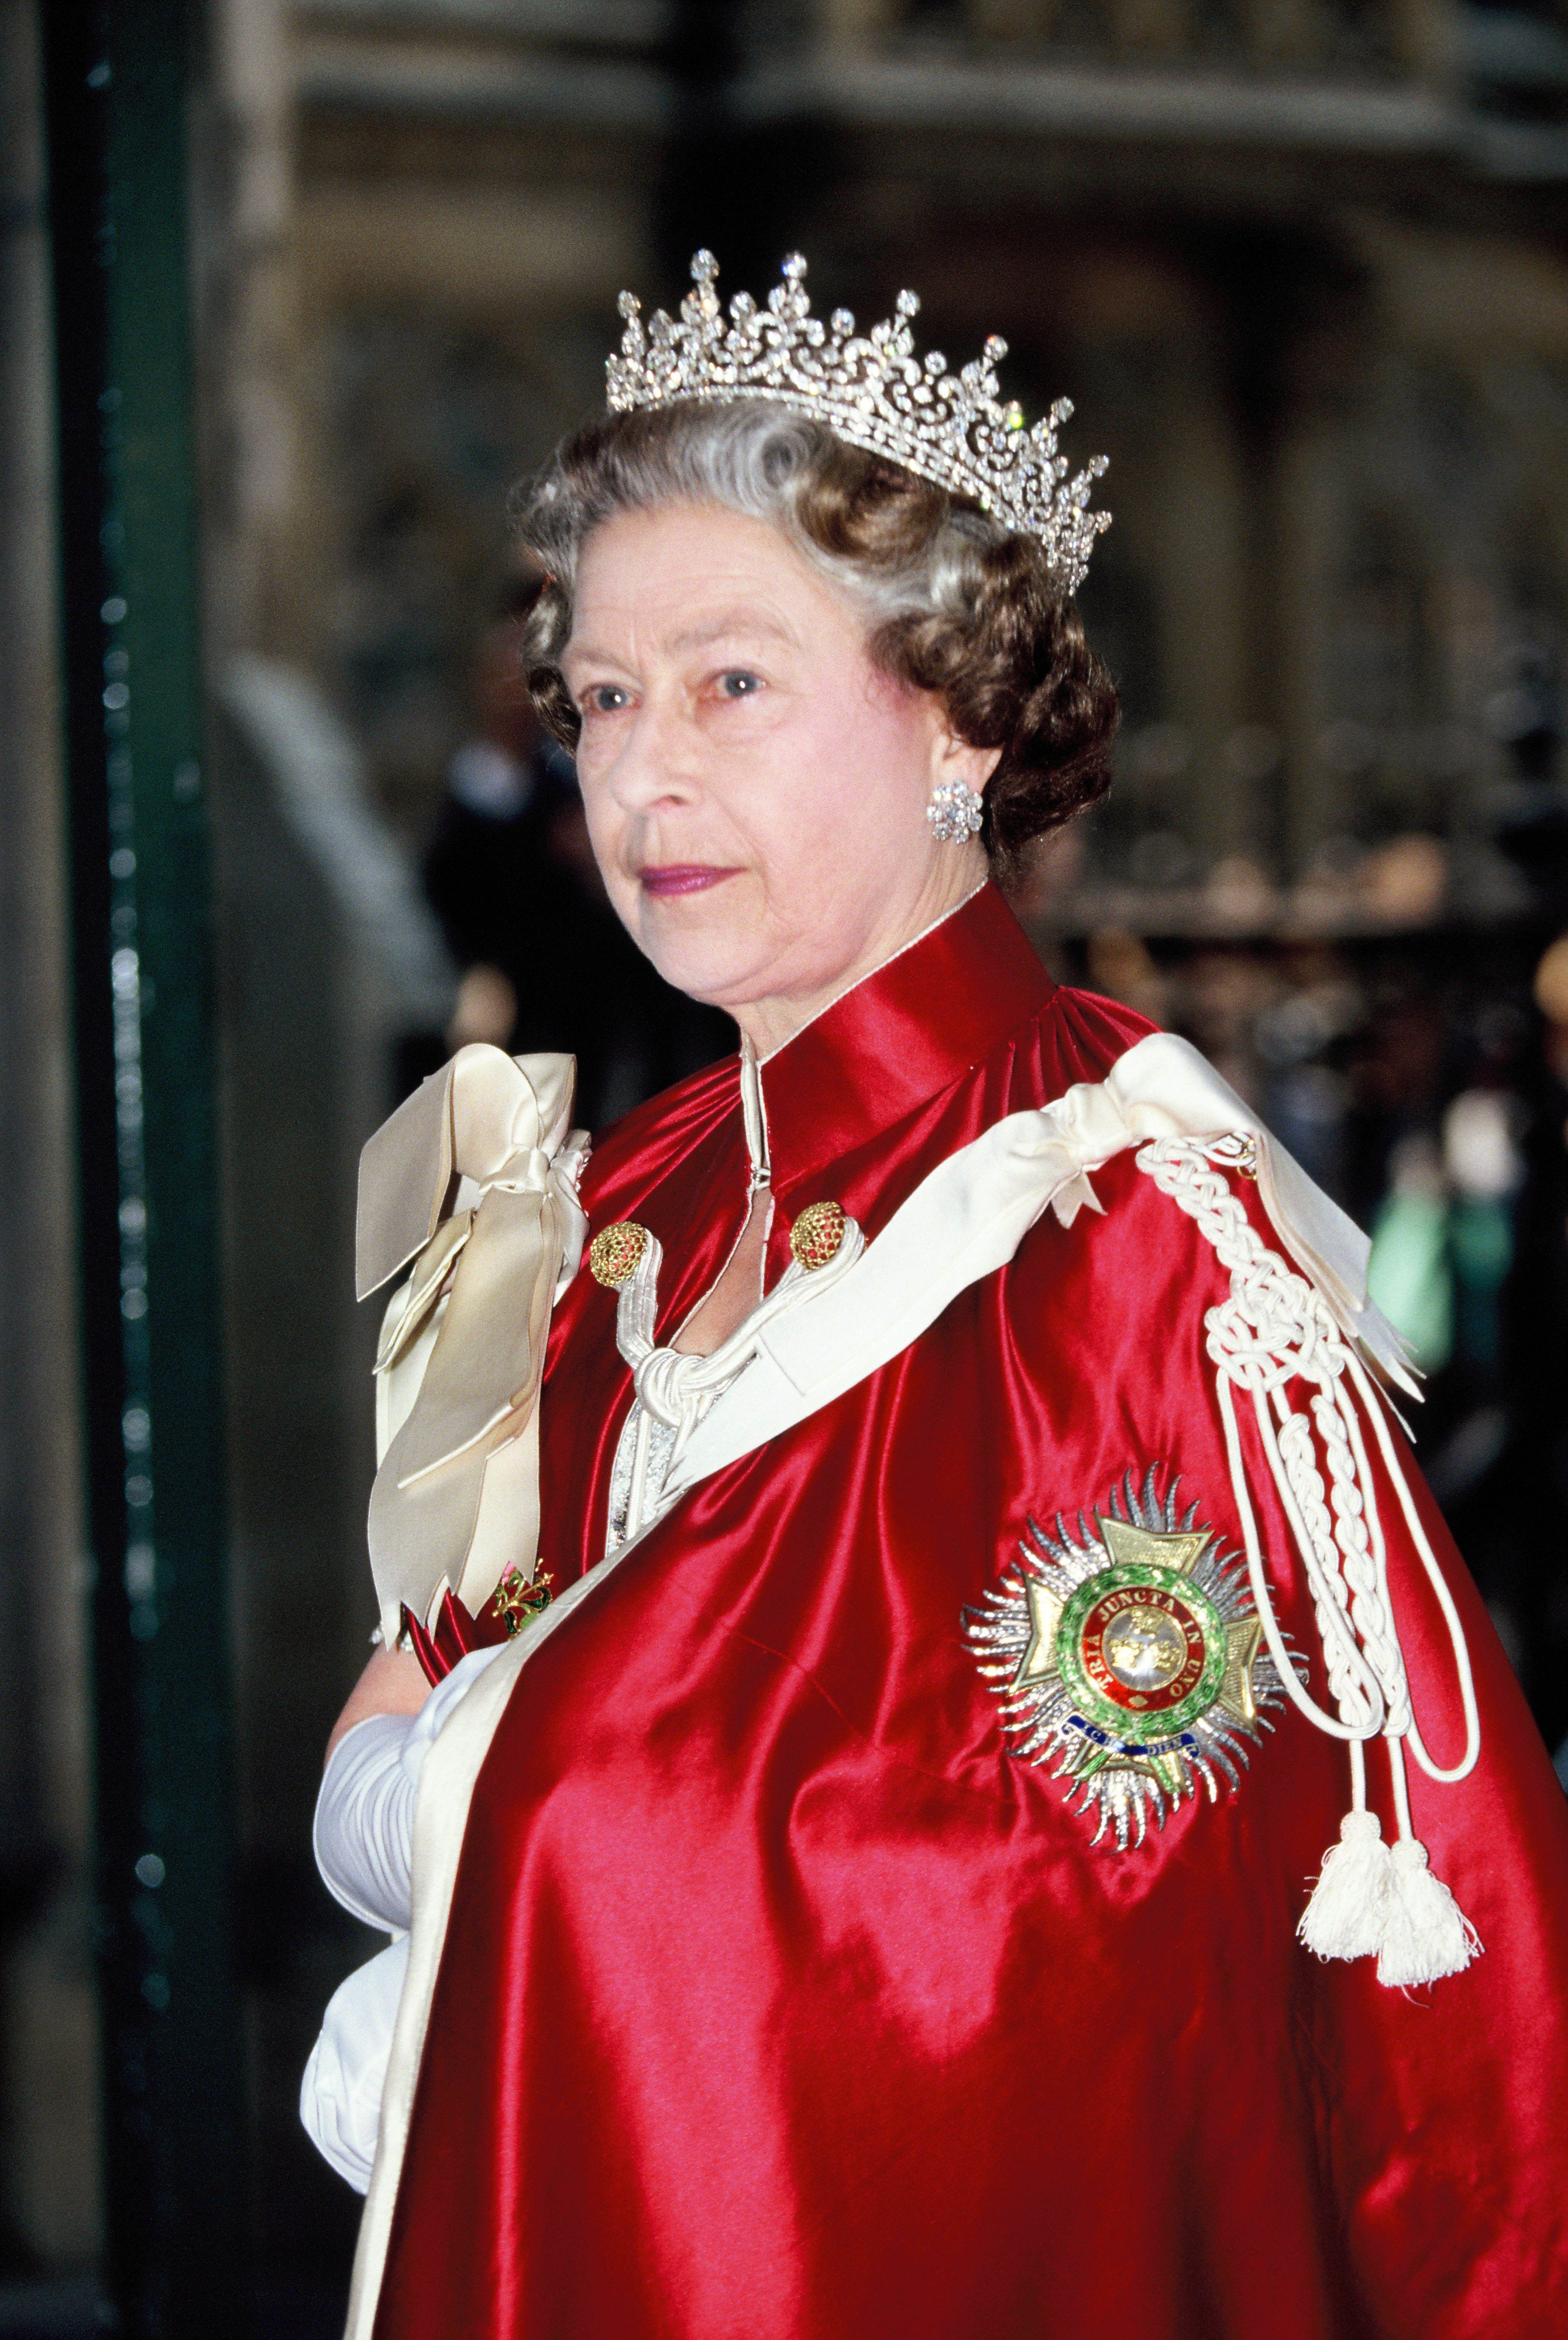 Queen Elizabeth II attends the Order of the Bath service at Westminster Abbey in 1990 ca. in London, England.  | Source: Getty Images